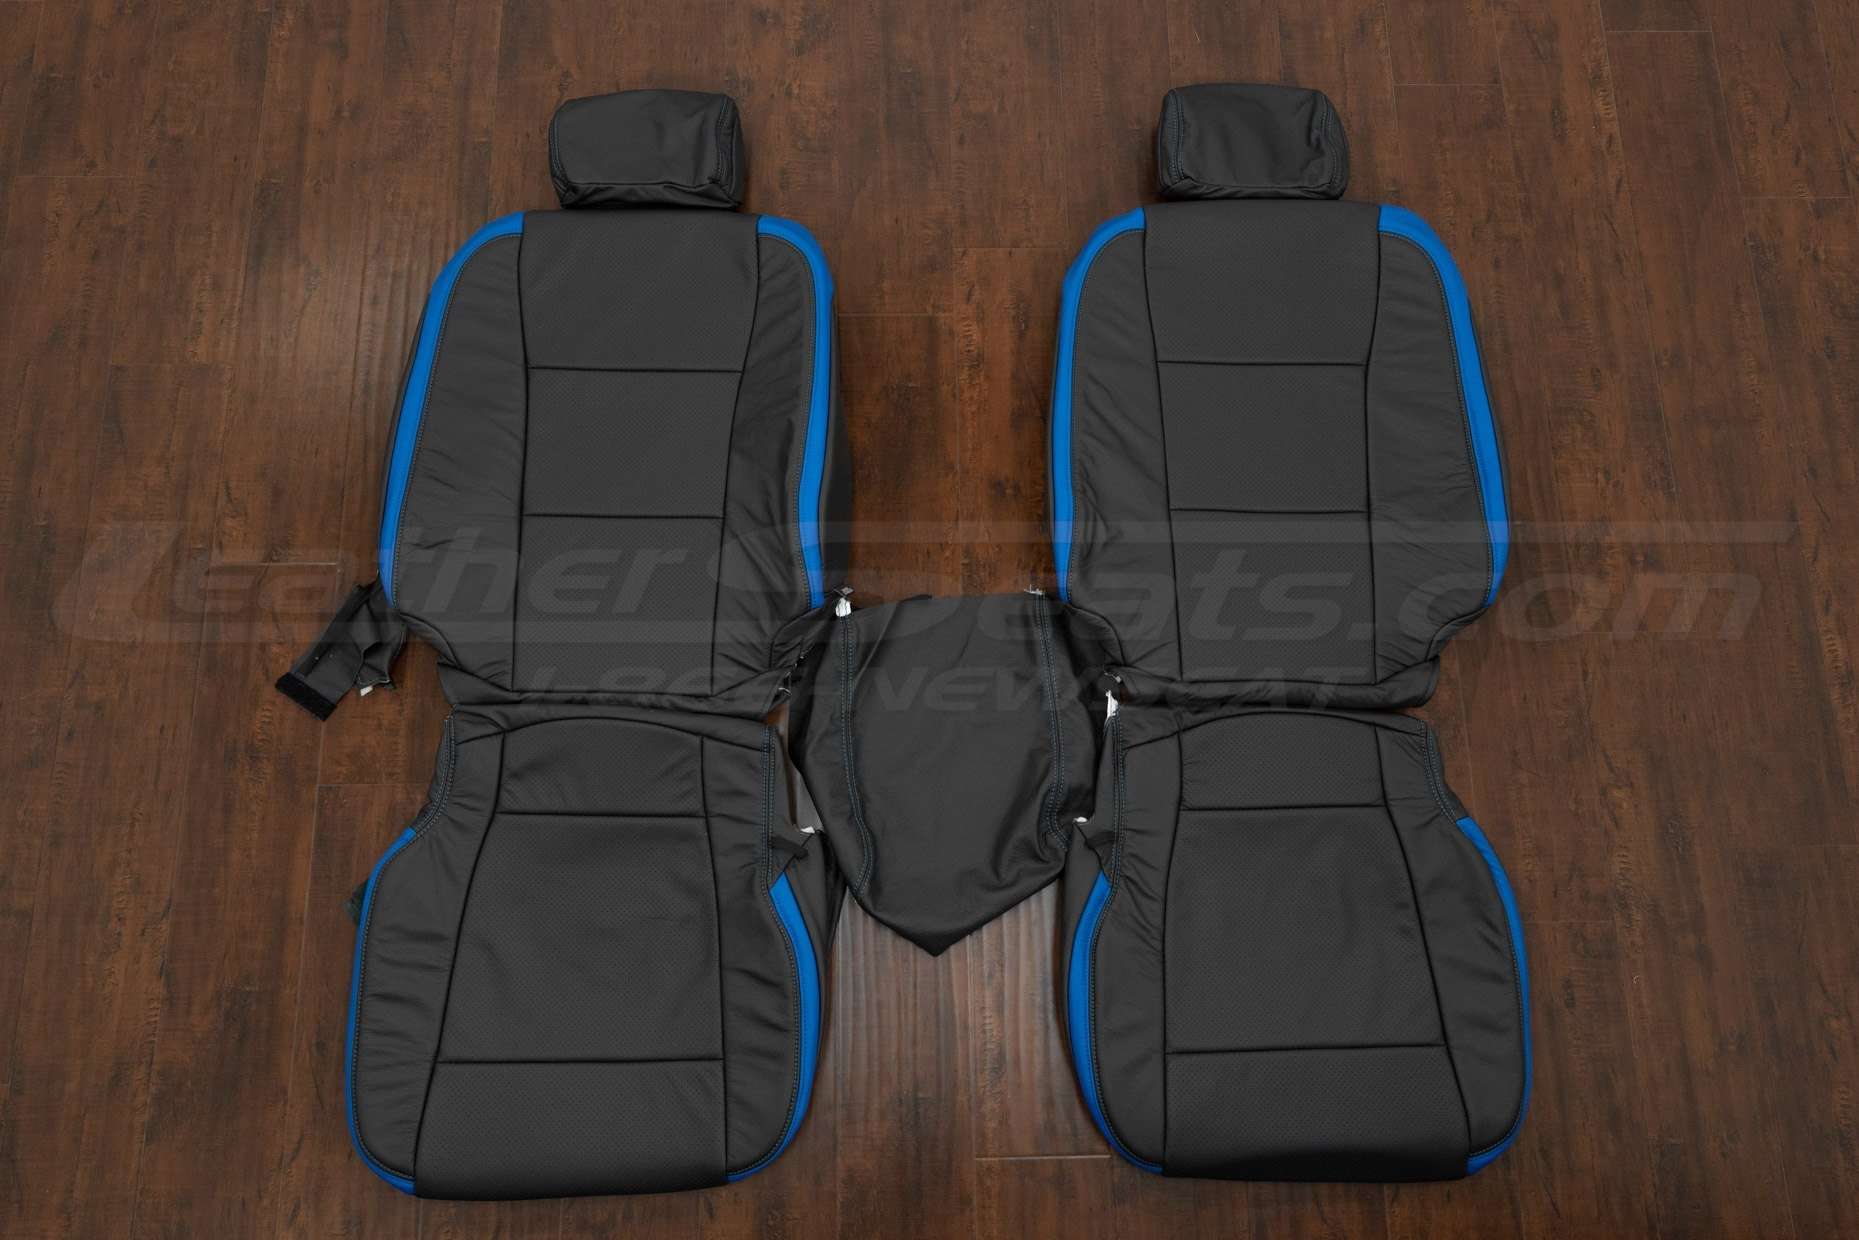 2022 Ford F-250 Crew Cab Leather Interior Kit - Dark Graphite/Cobalt Wings - Front seat upholstery with console lid cover